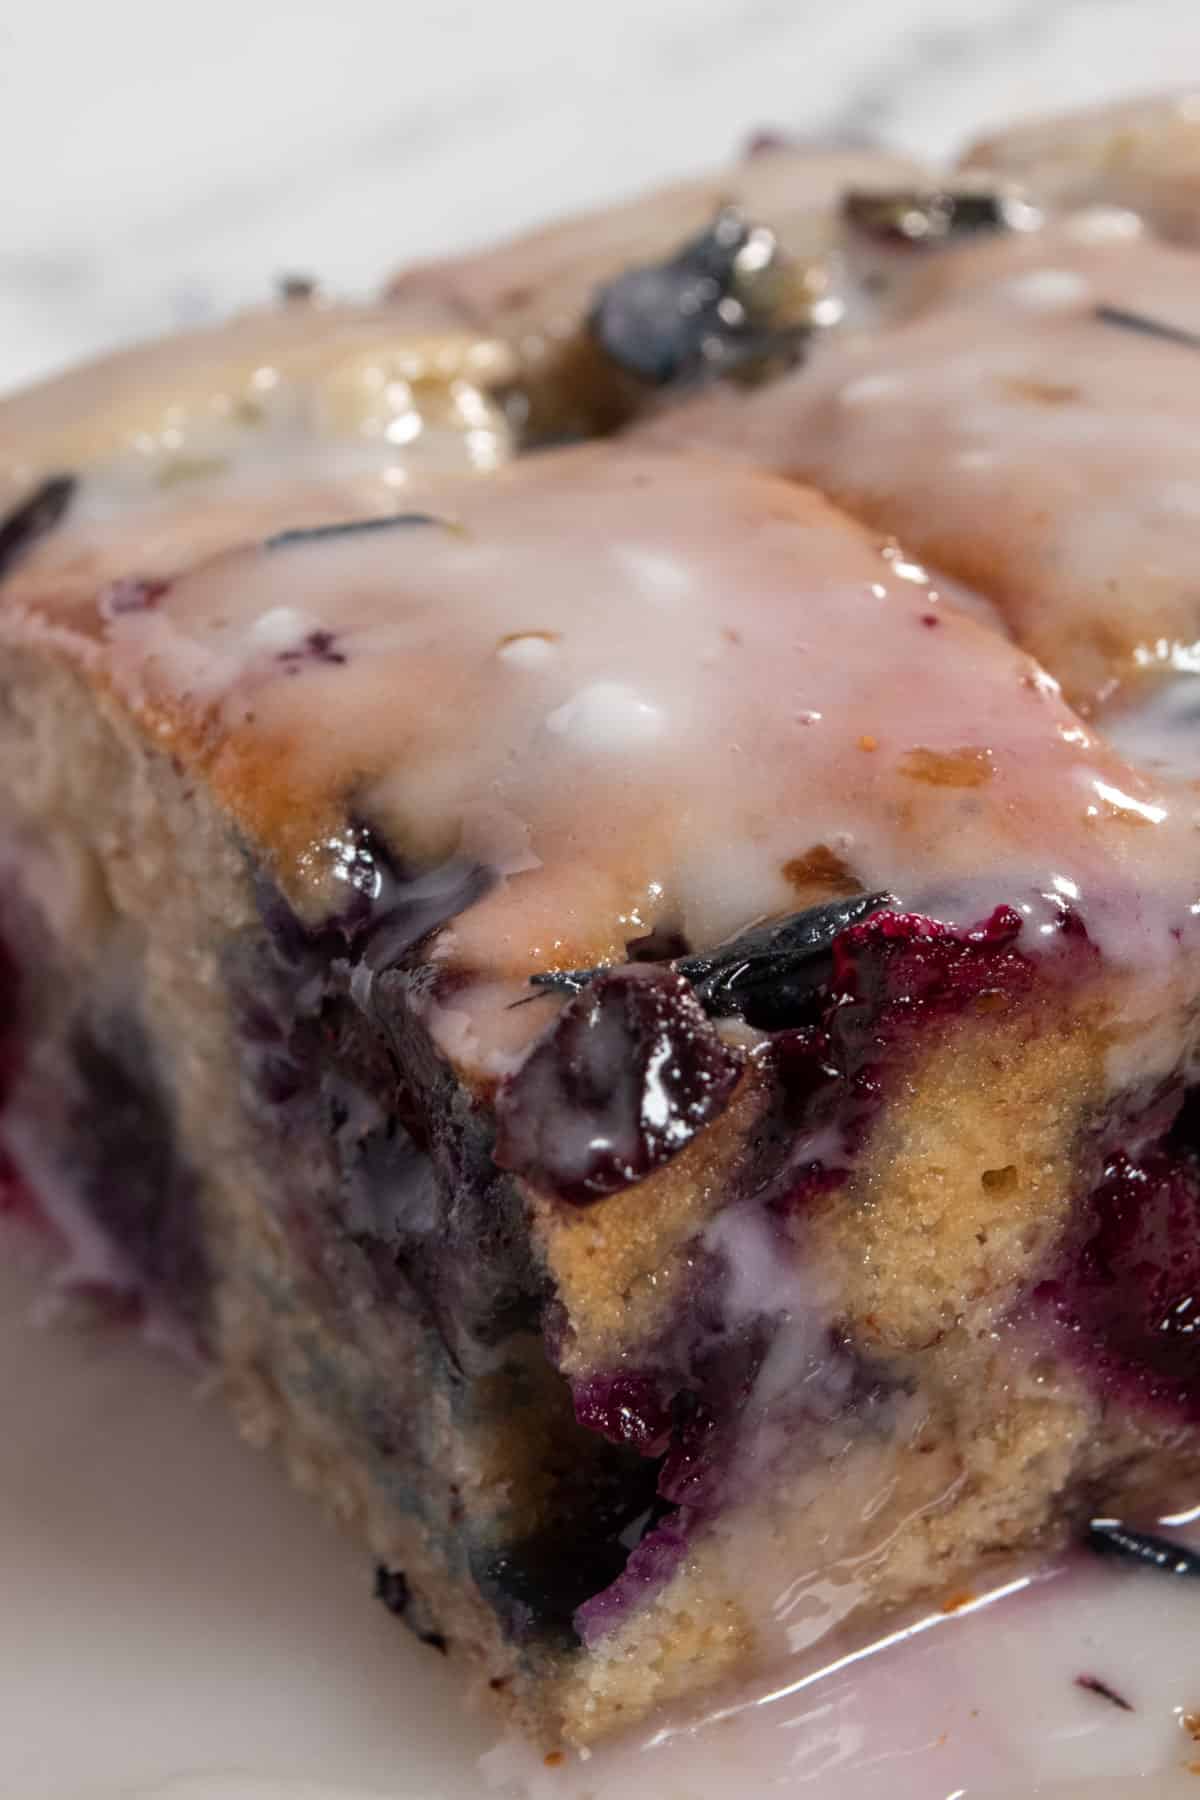 A side angled picture of my vegan blueberry banana cake. Blueberry glaze is dripping down the side.